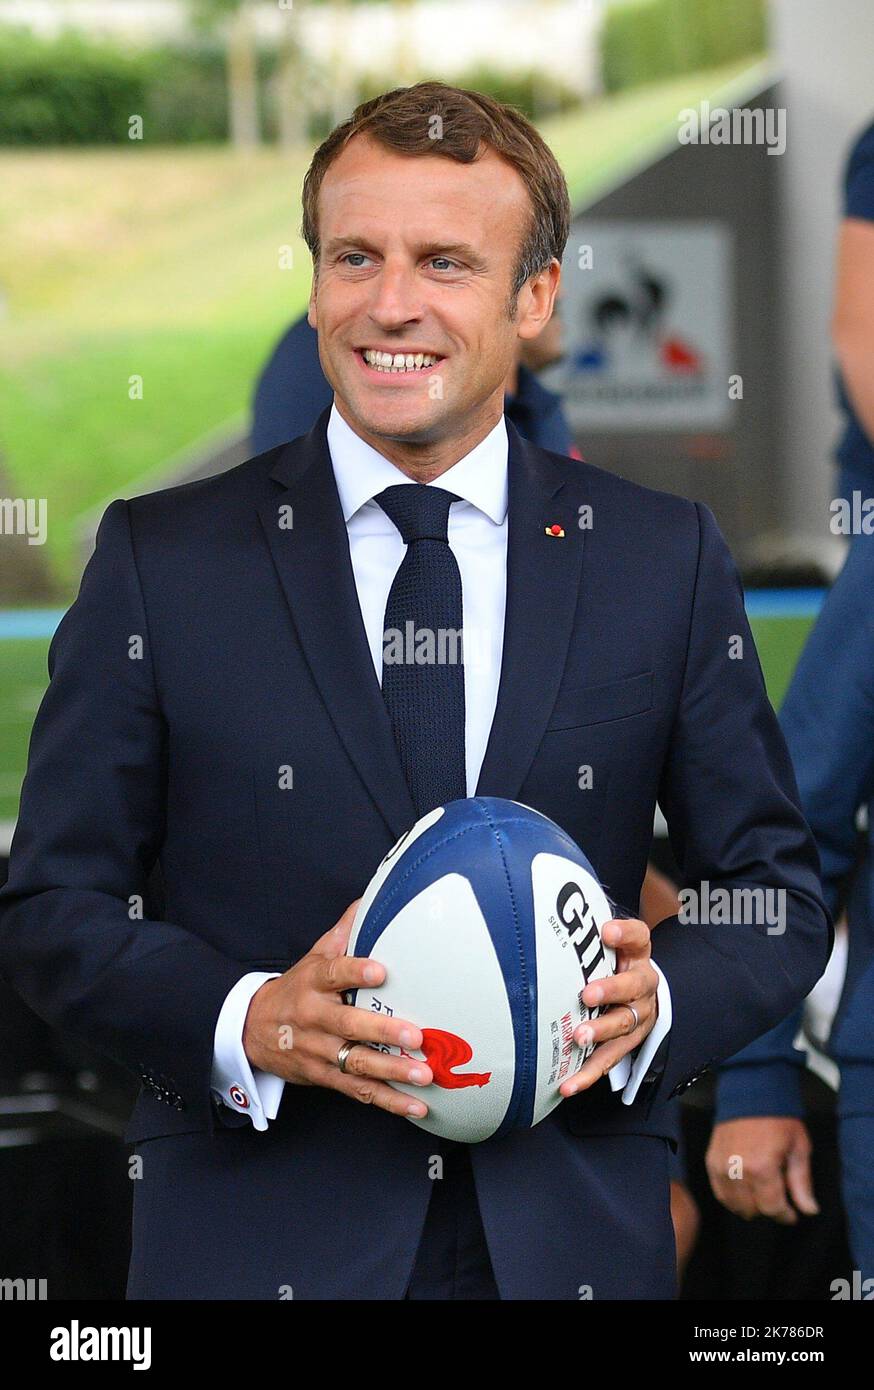 France's President Emmanuel Macron at the National Rugby Center in Marcoussis, south of Paris, on September 5, 2019. The French rugby team is preparing for the upcoming 2019 World Cup in Japan. President Macron visited ahead of the upcoming Rugby World Cup, at the National Rugby Center in Marcoussis.   Stock Photo